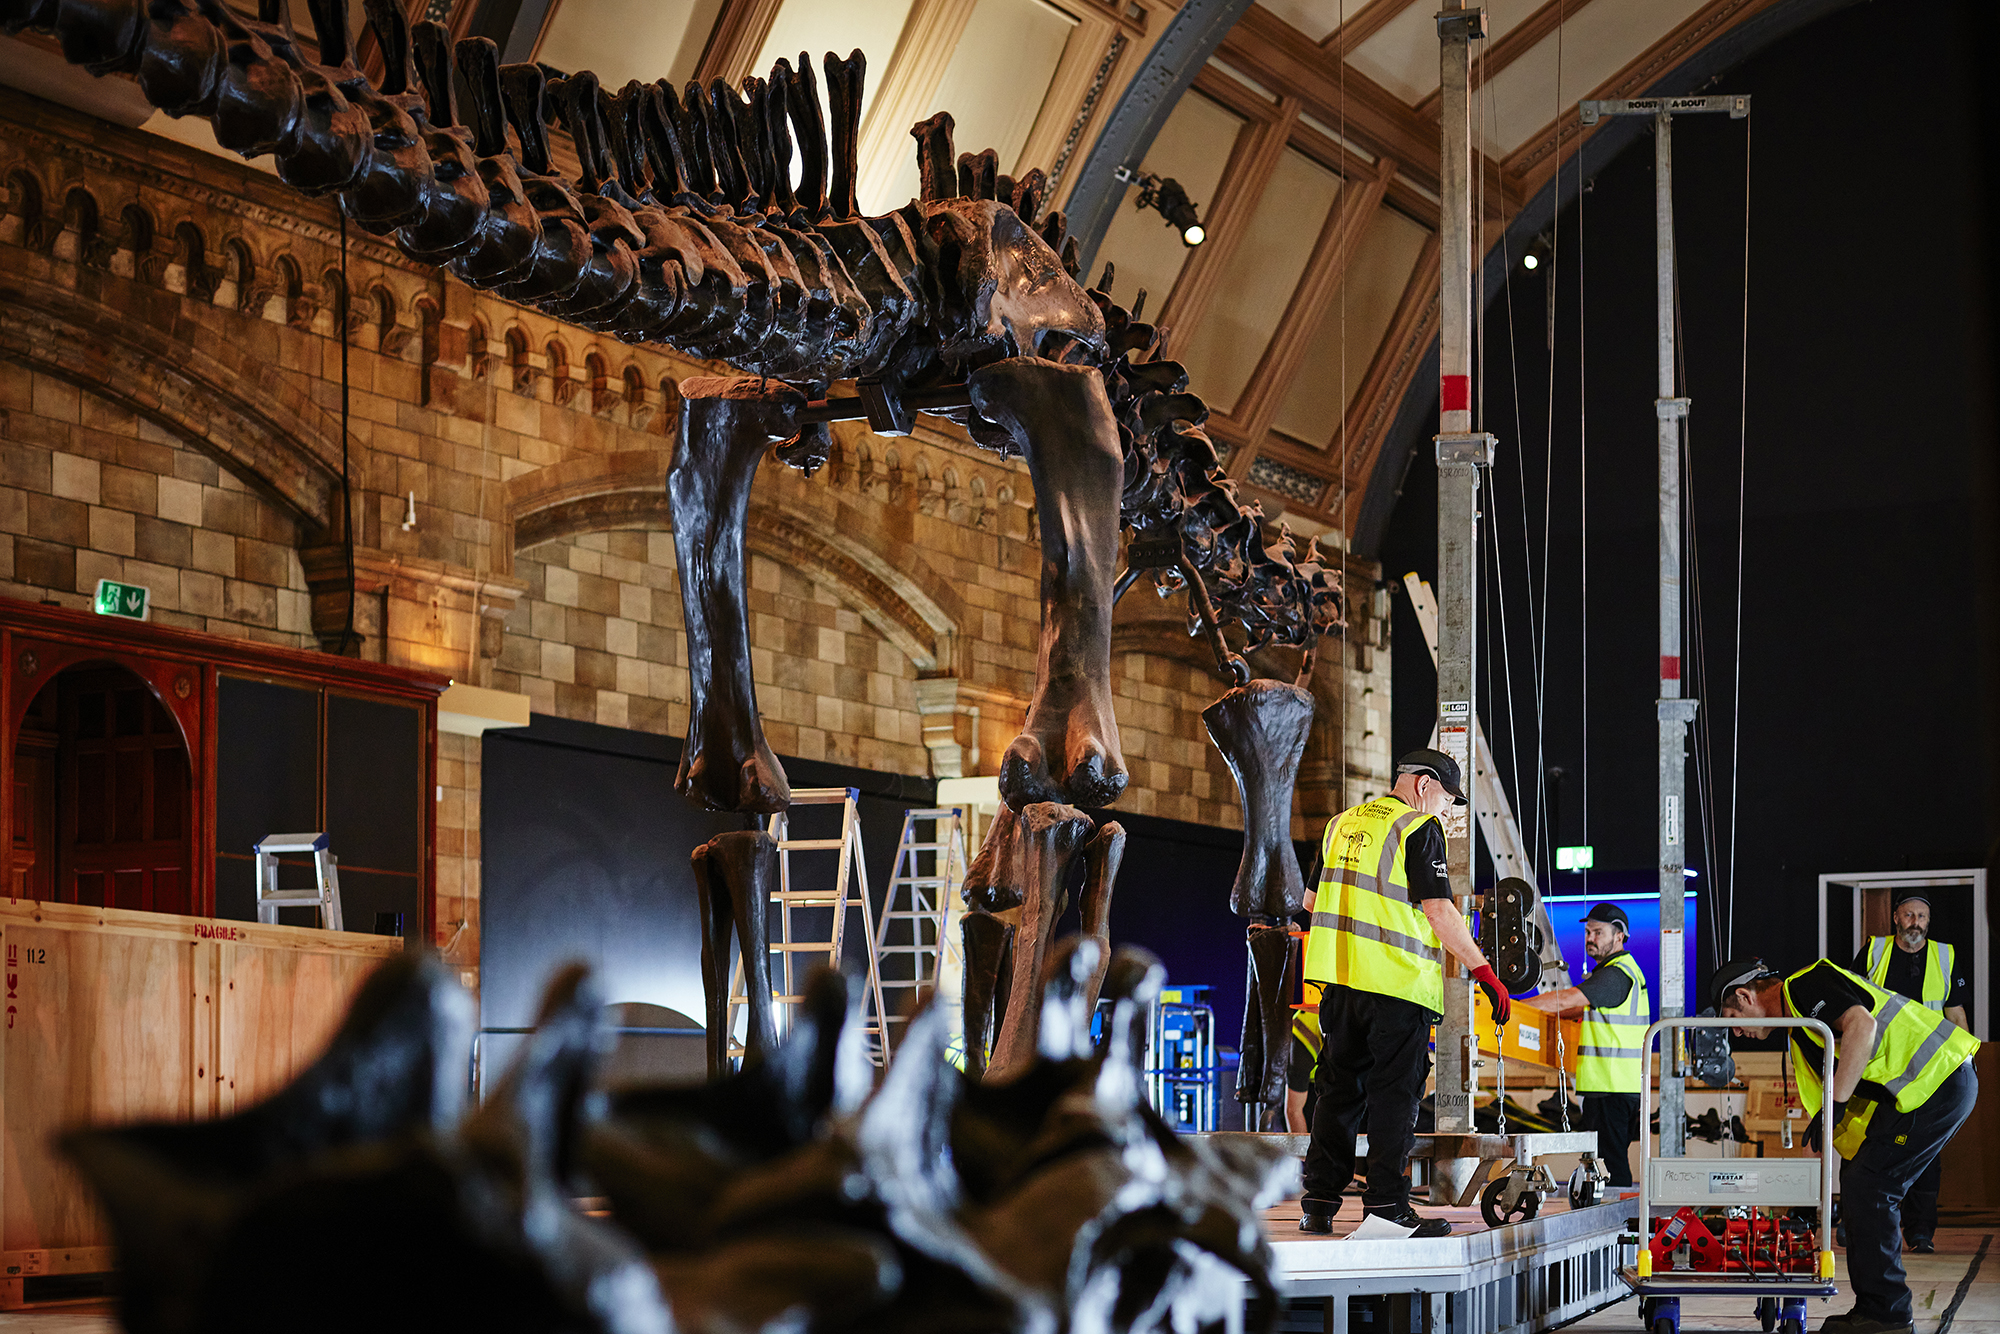 People in hi vis vests deinstalling Dippy the Diplodocus cast at the Natural History Museum